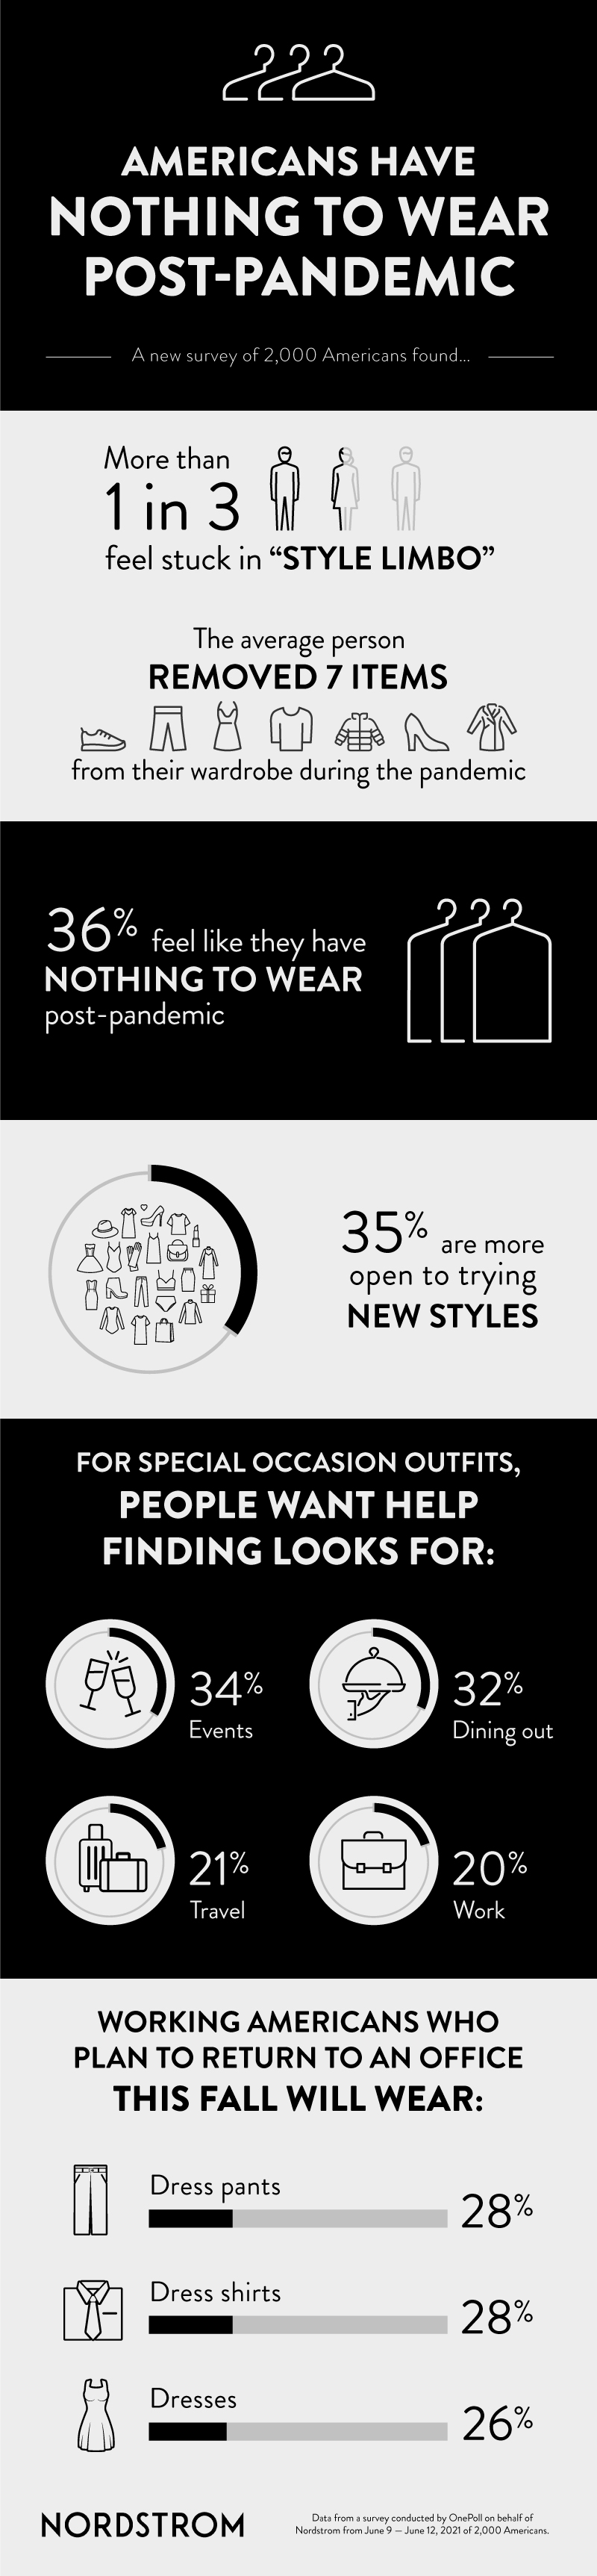 Nordstrom Post-Pandemic Style Report Infographic